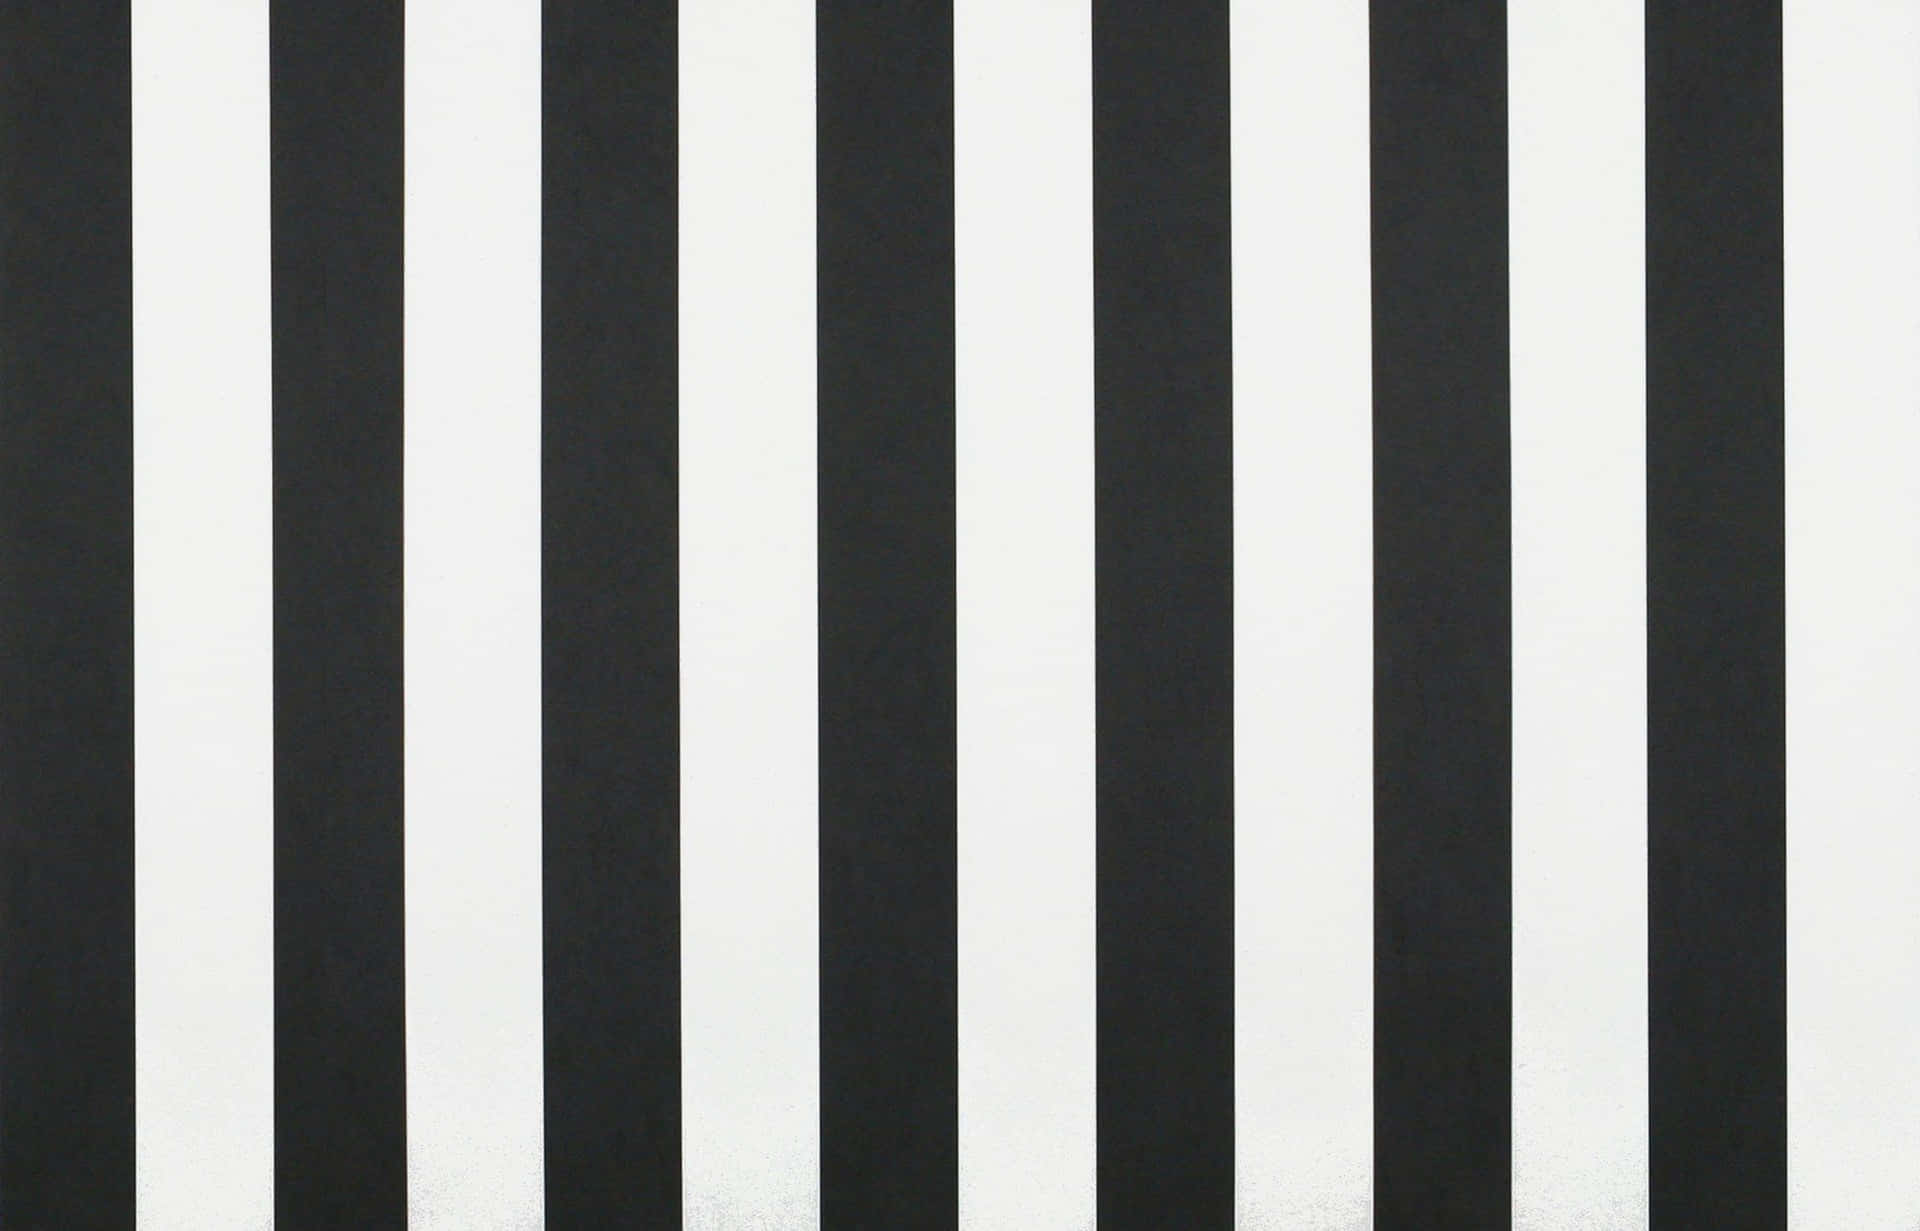 Classic Black And White Stripes Never Go Out Of Style. Background